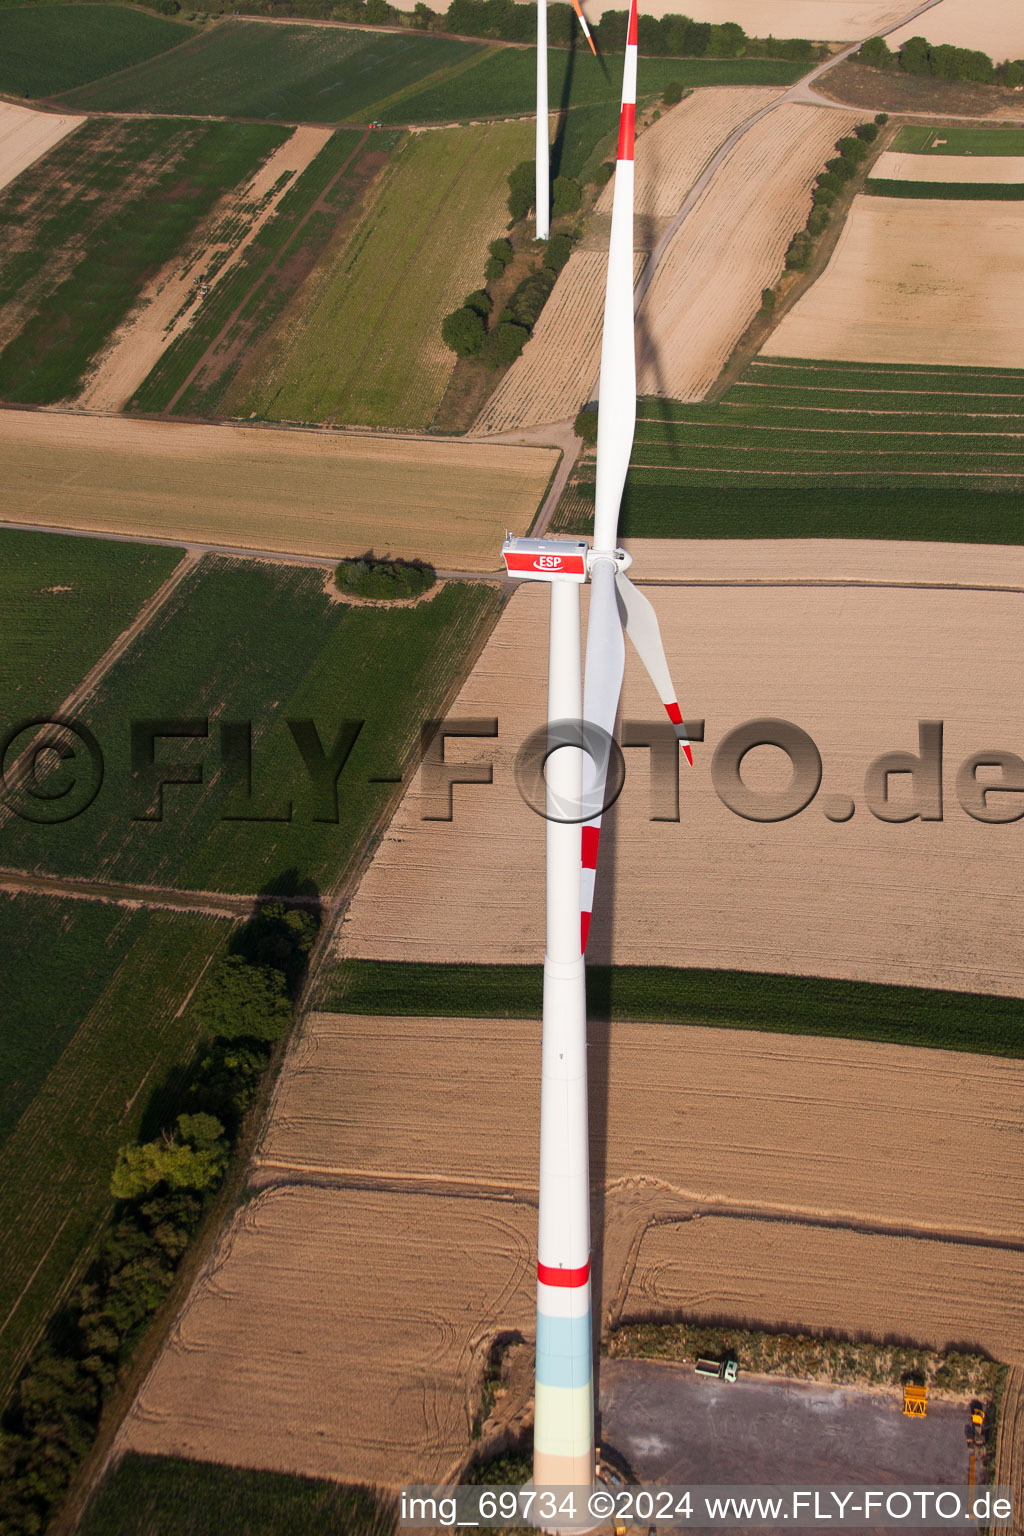 Wind farm construction in Offenbach an der Queich in the state Rhineland-Palatinate, Germany from the drone perspective